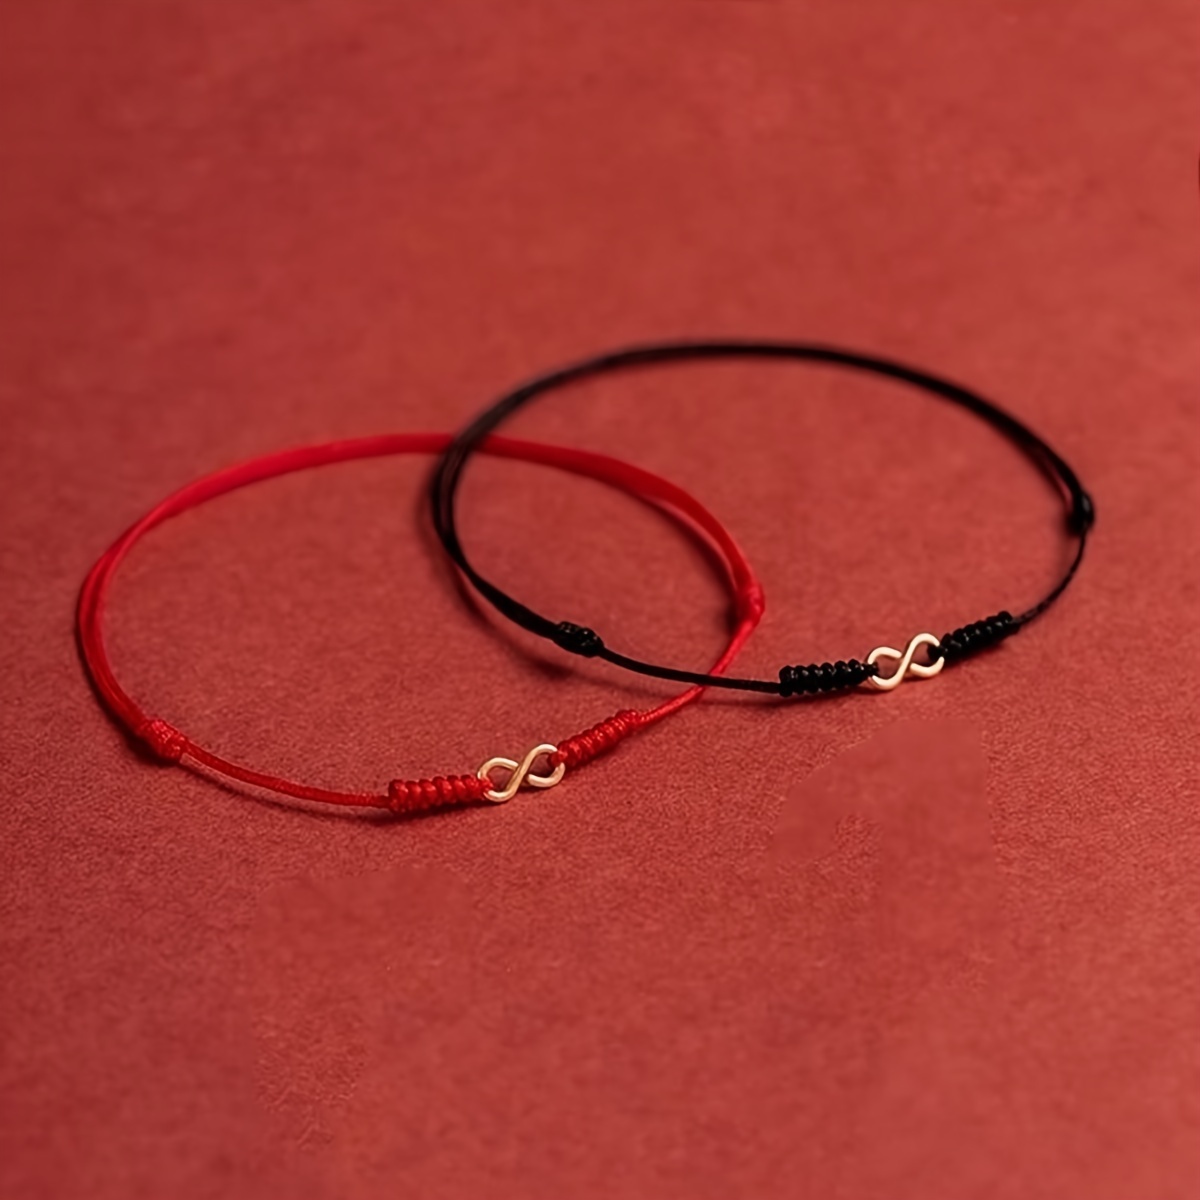 

1pc Lucky Red/black Rope Bracelet For Couples, Relationship Friendship Gift, For Women Men Jewelry Gift